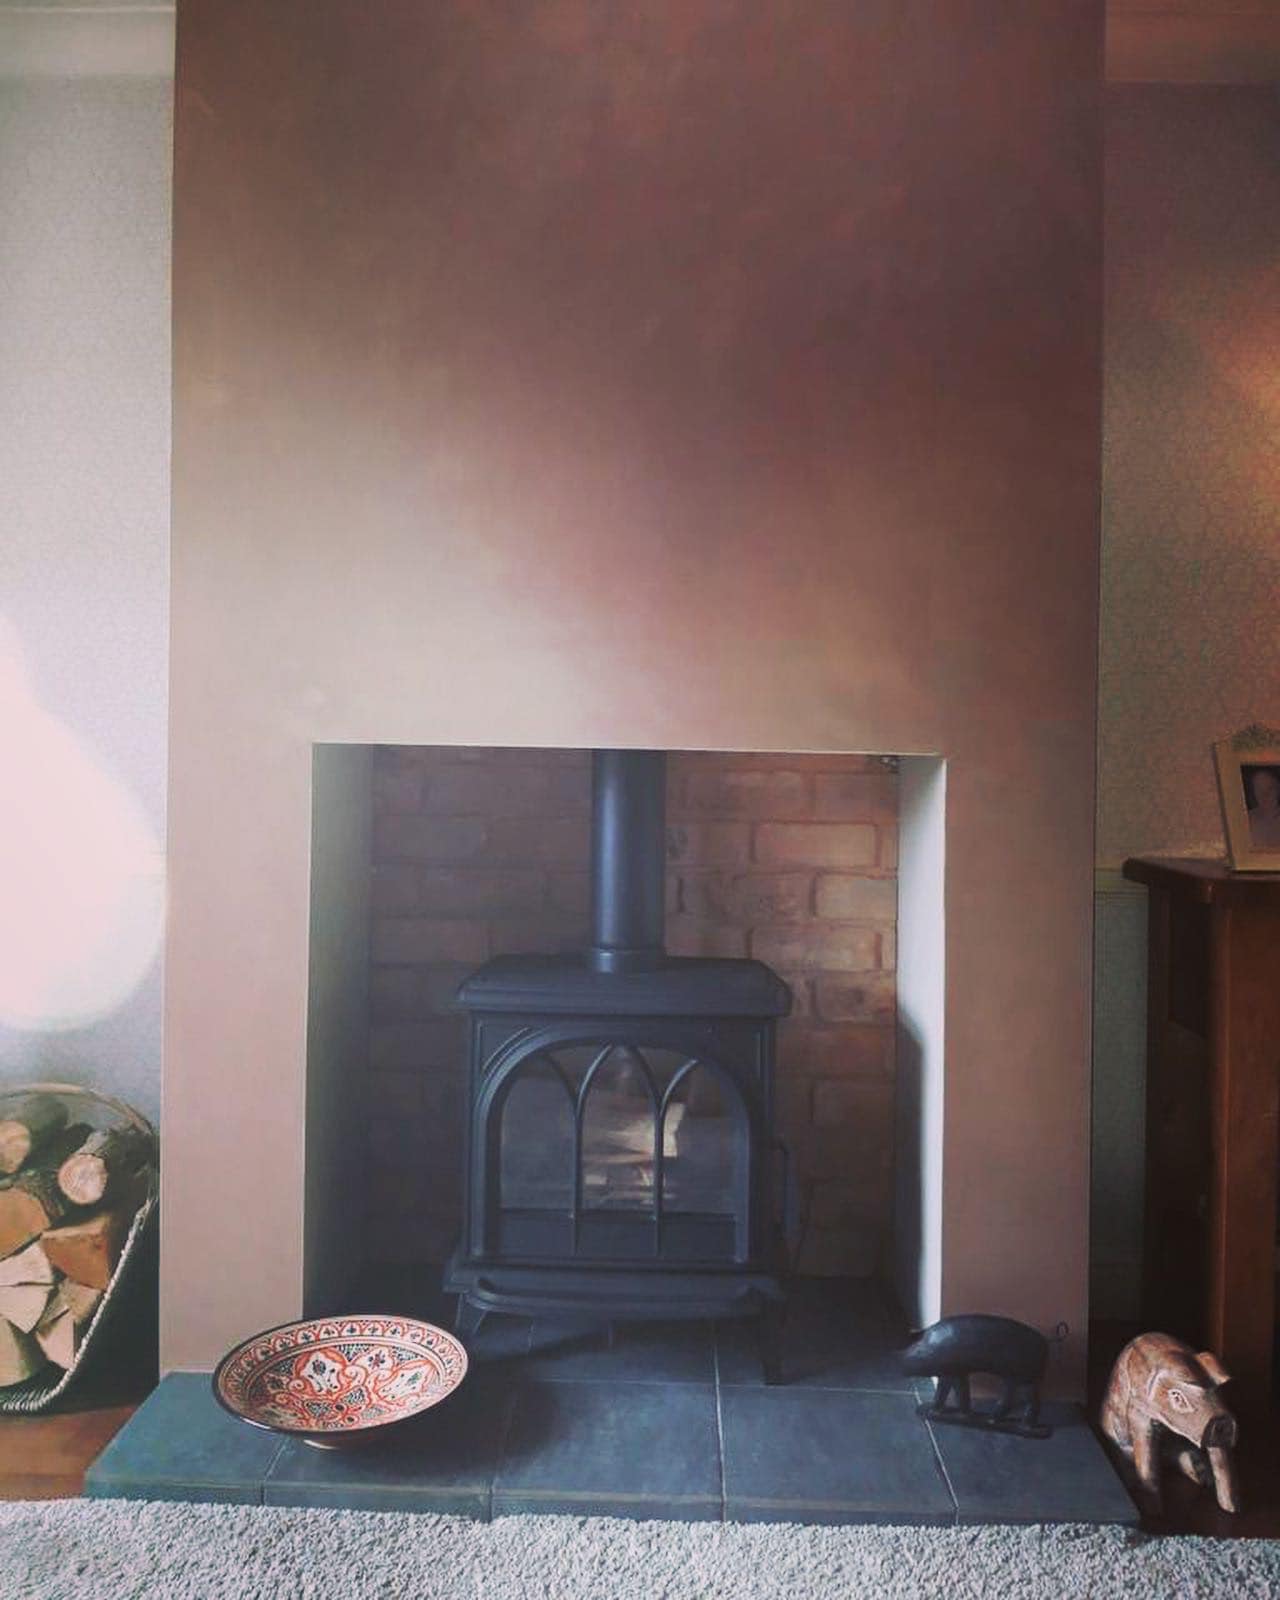 Stovax Huntingdon 30 Wood Burner With False Chimney Breast And Twin Wall Flue Installed In Warrington